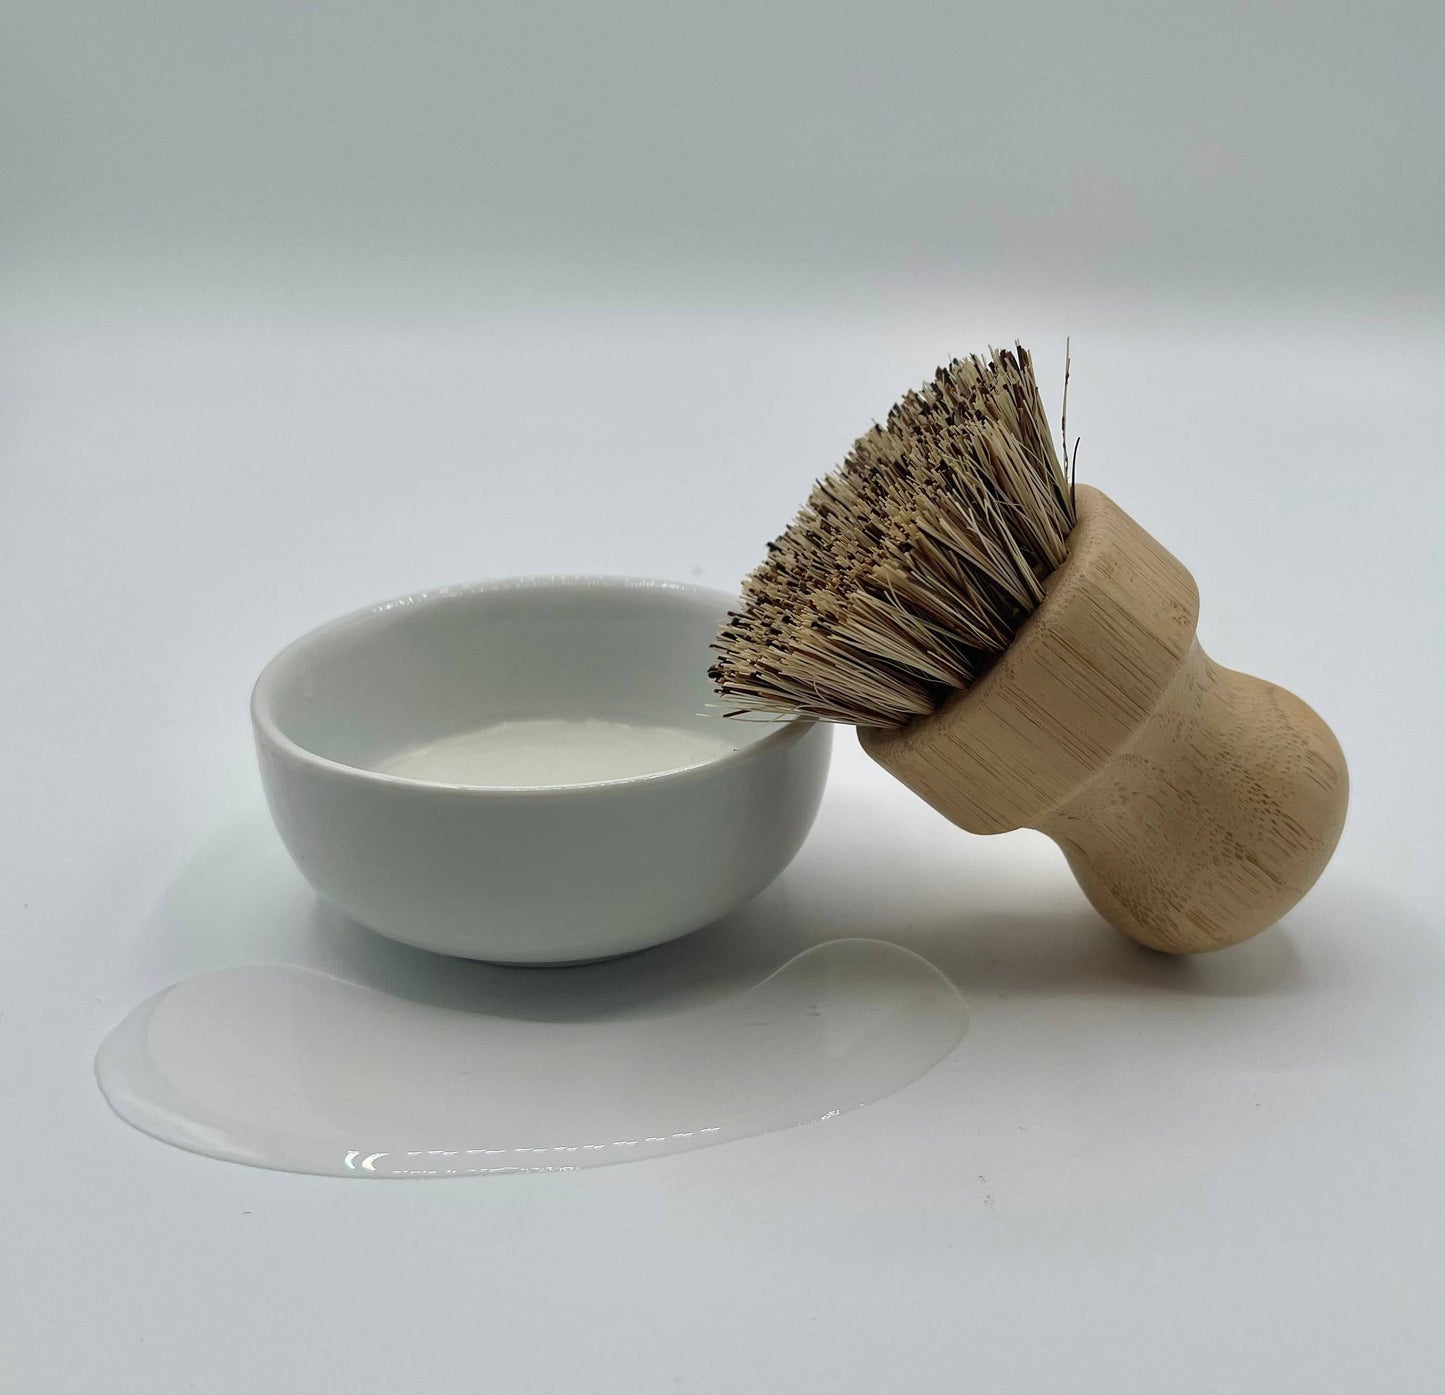 Bamboo Scrubber Brushes